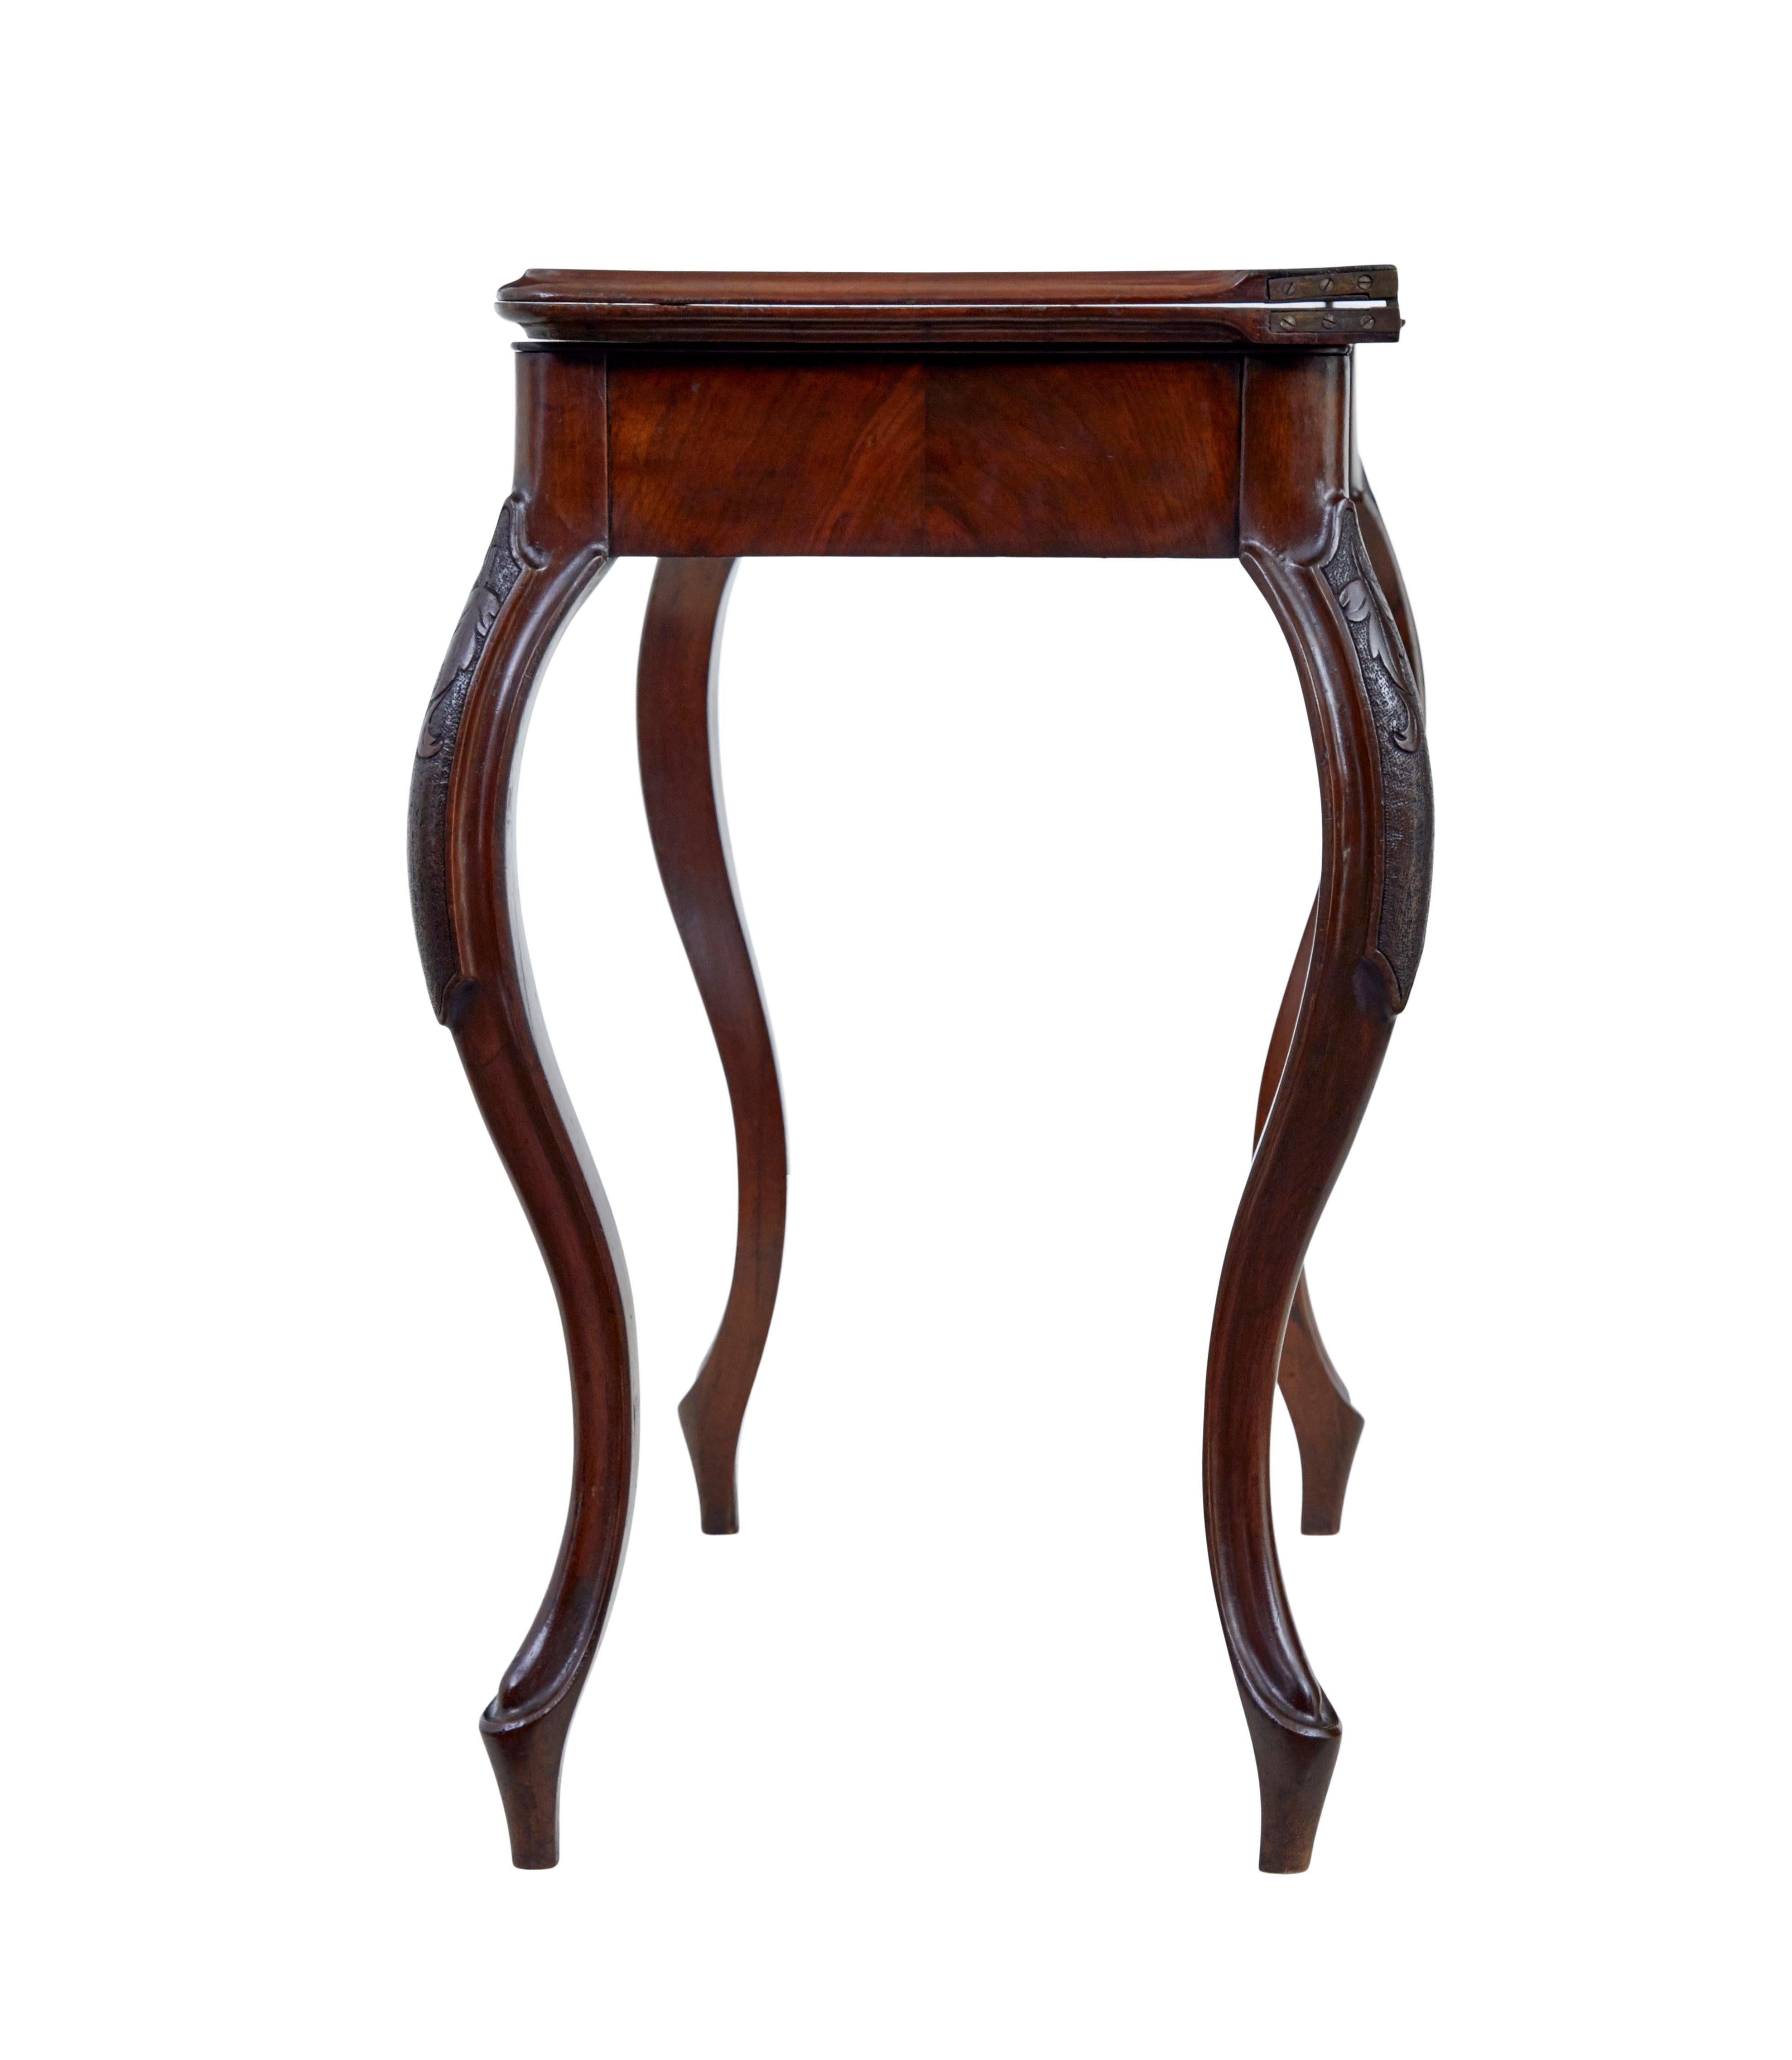 Hand-Carved 19th century carved mahogany games table